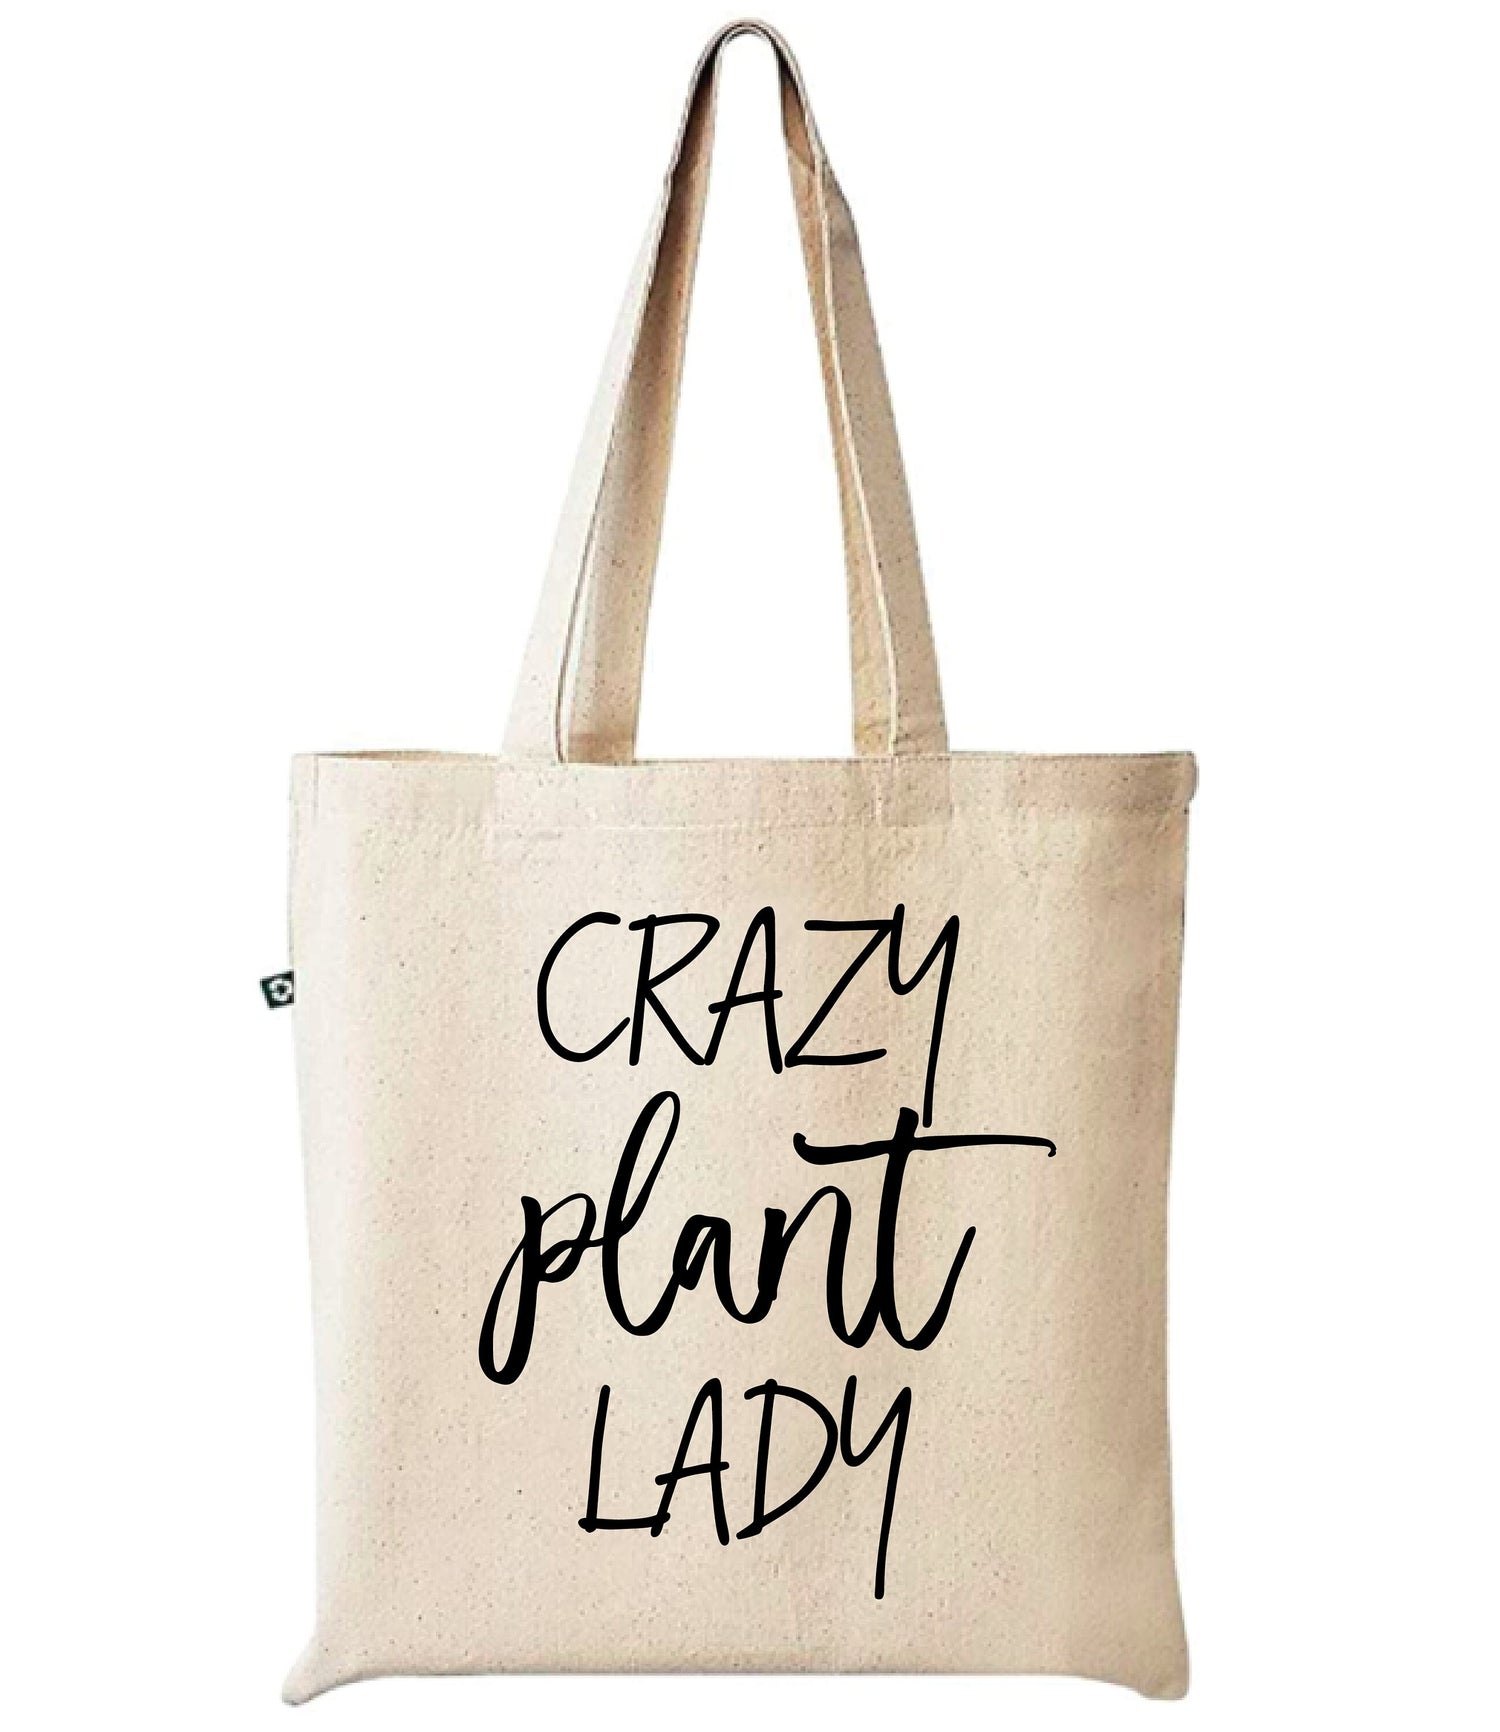 Crazy Plant Lady Recycled Cotton Canvas Tote Bag